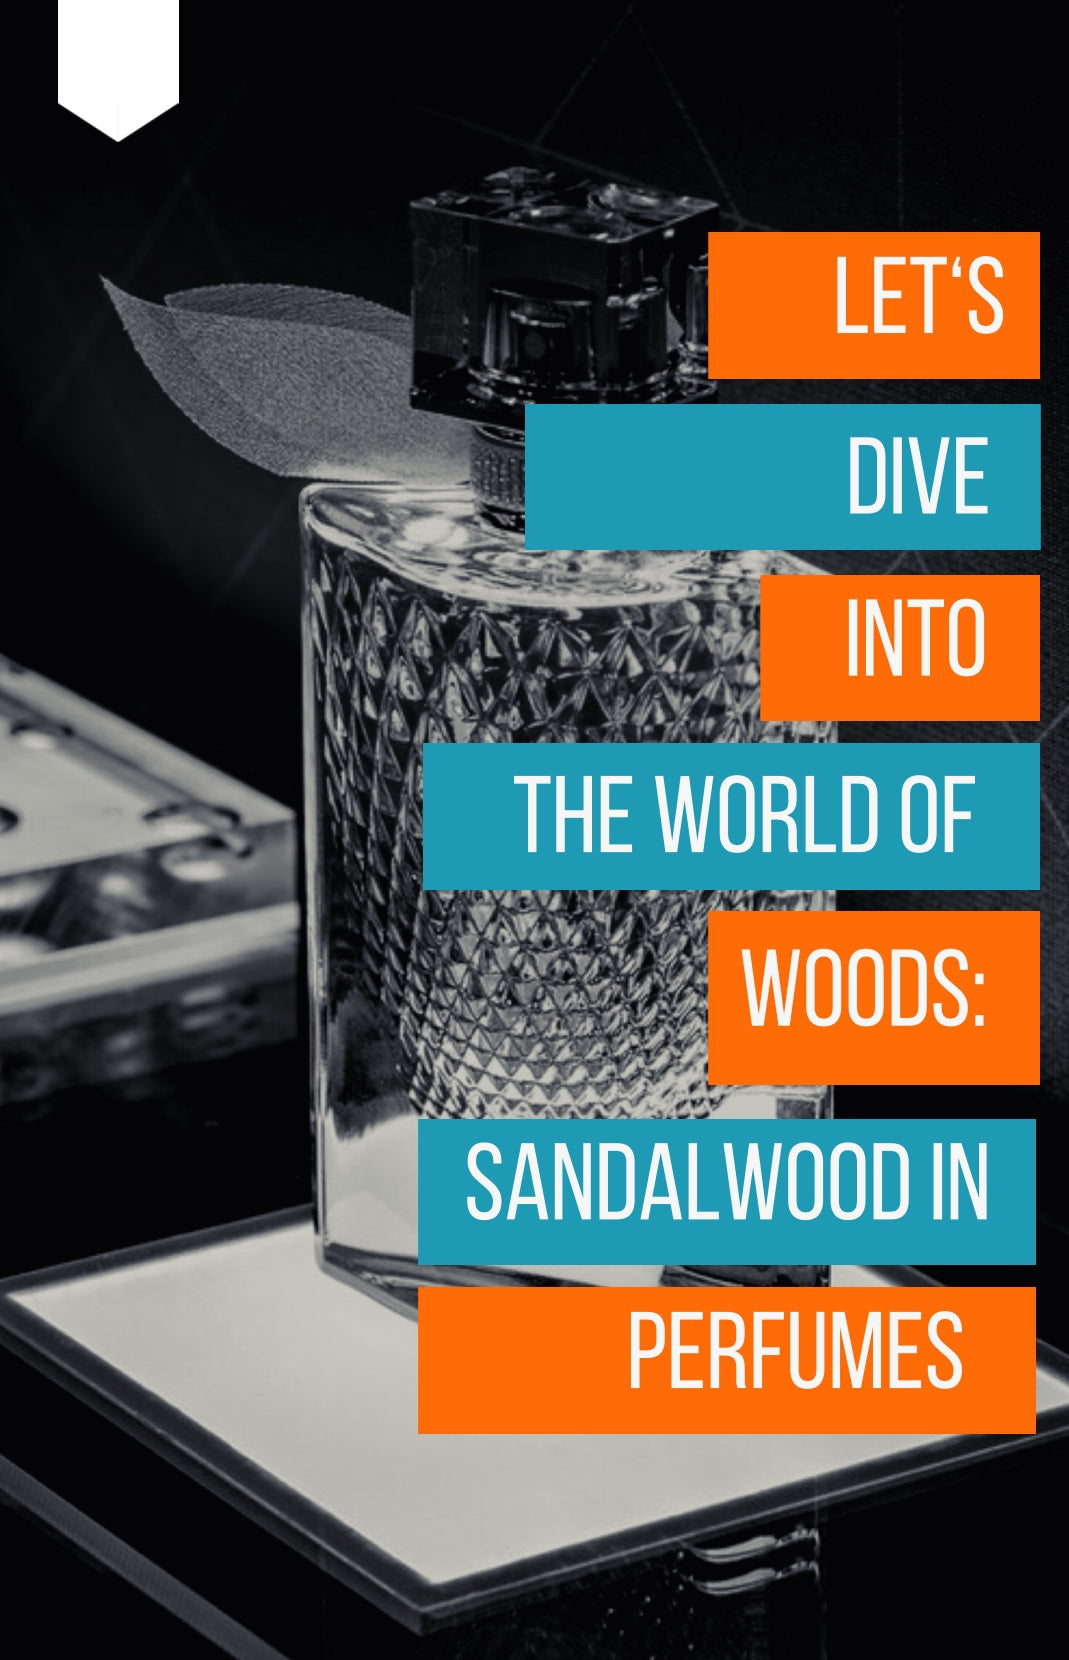 LET US DIVE INTO THE WORLD OF WOODS: SANDALWOOD IN PERFUMES